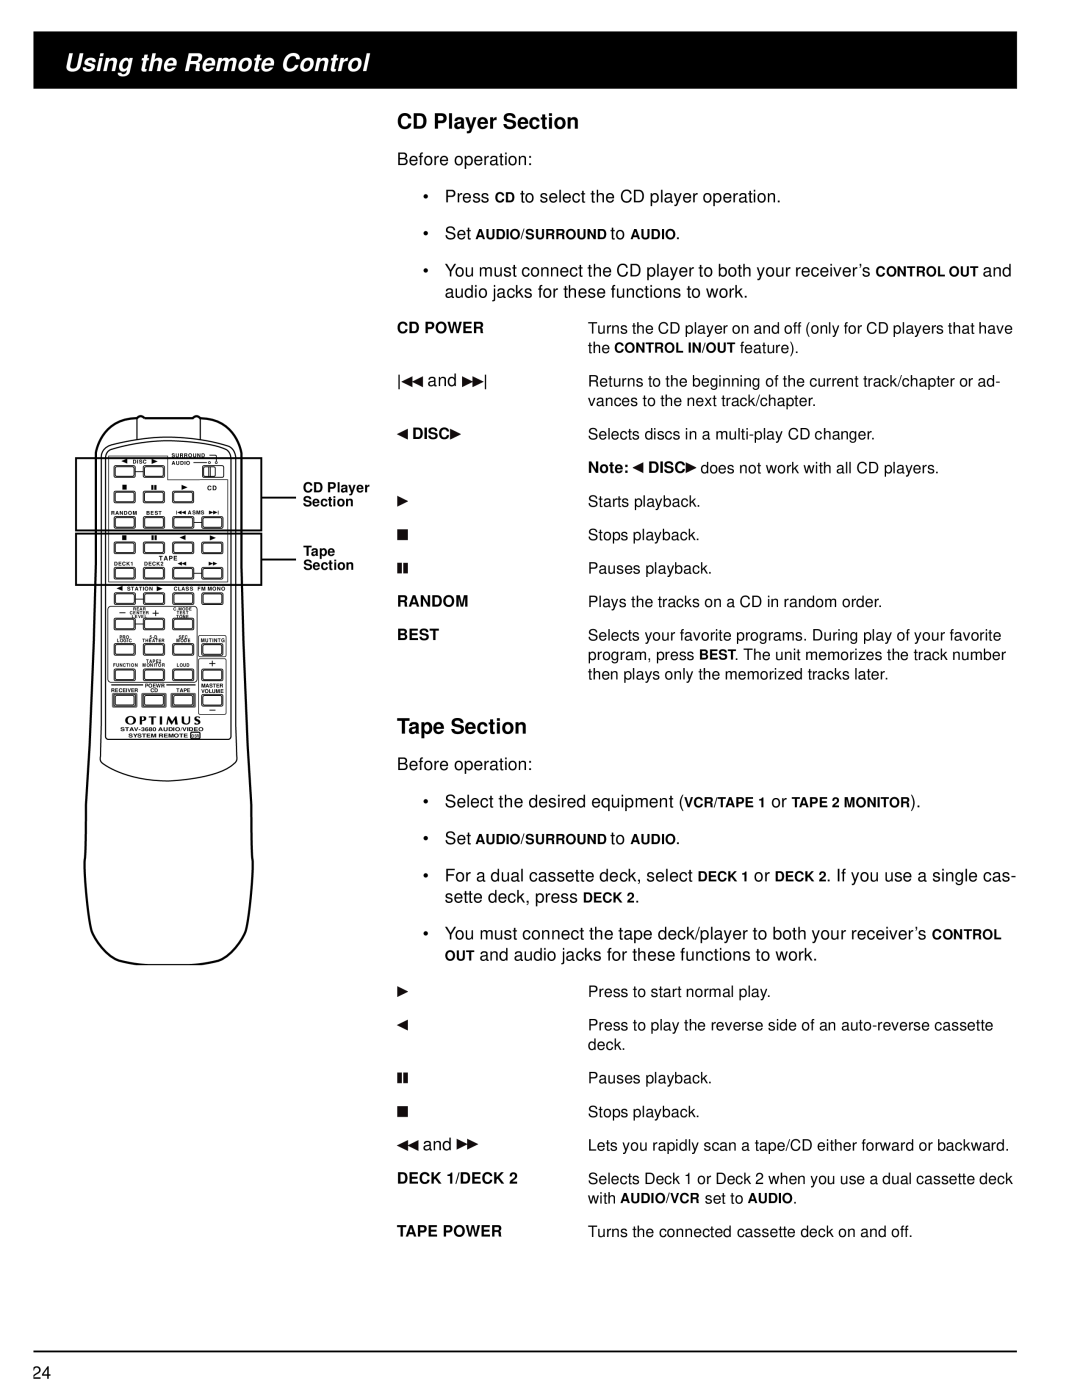 Optimus STAV-3680 owner manual Using the Remote Control, CD Player Section, Tape Section 